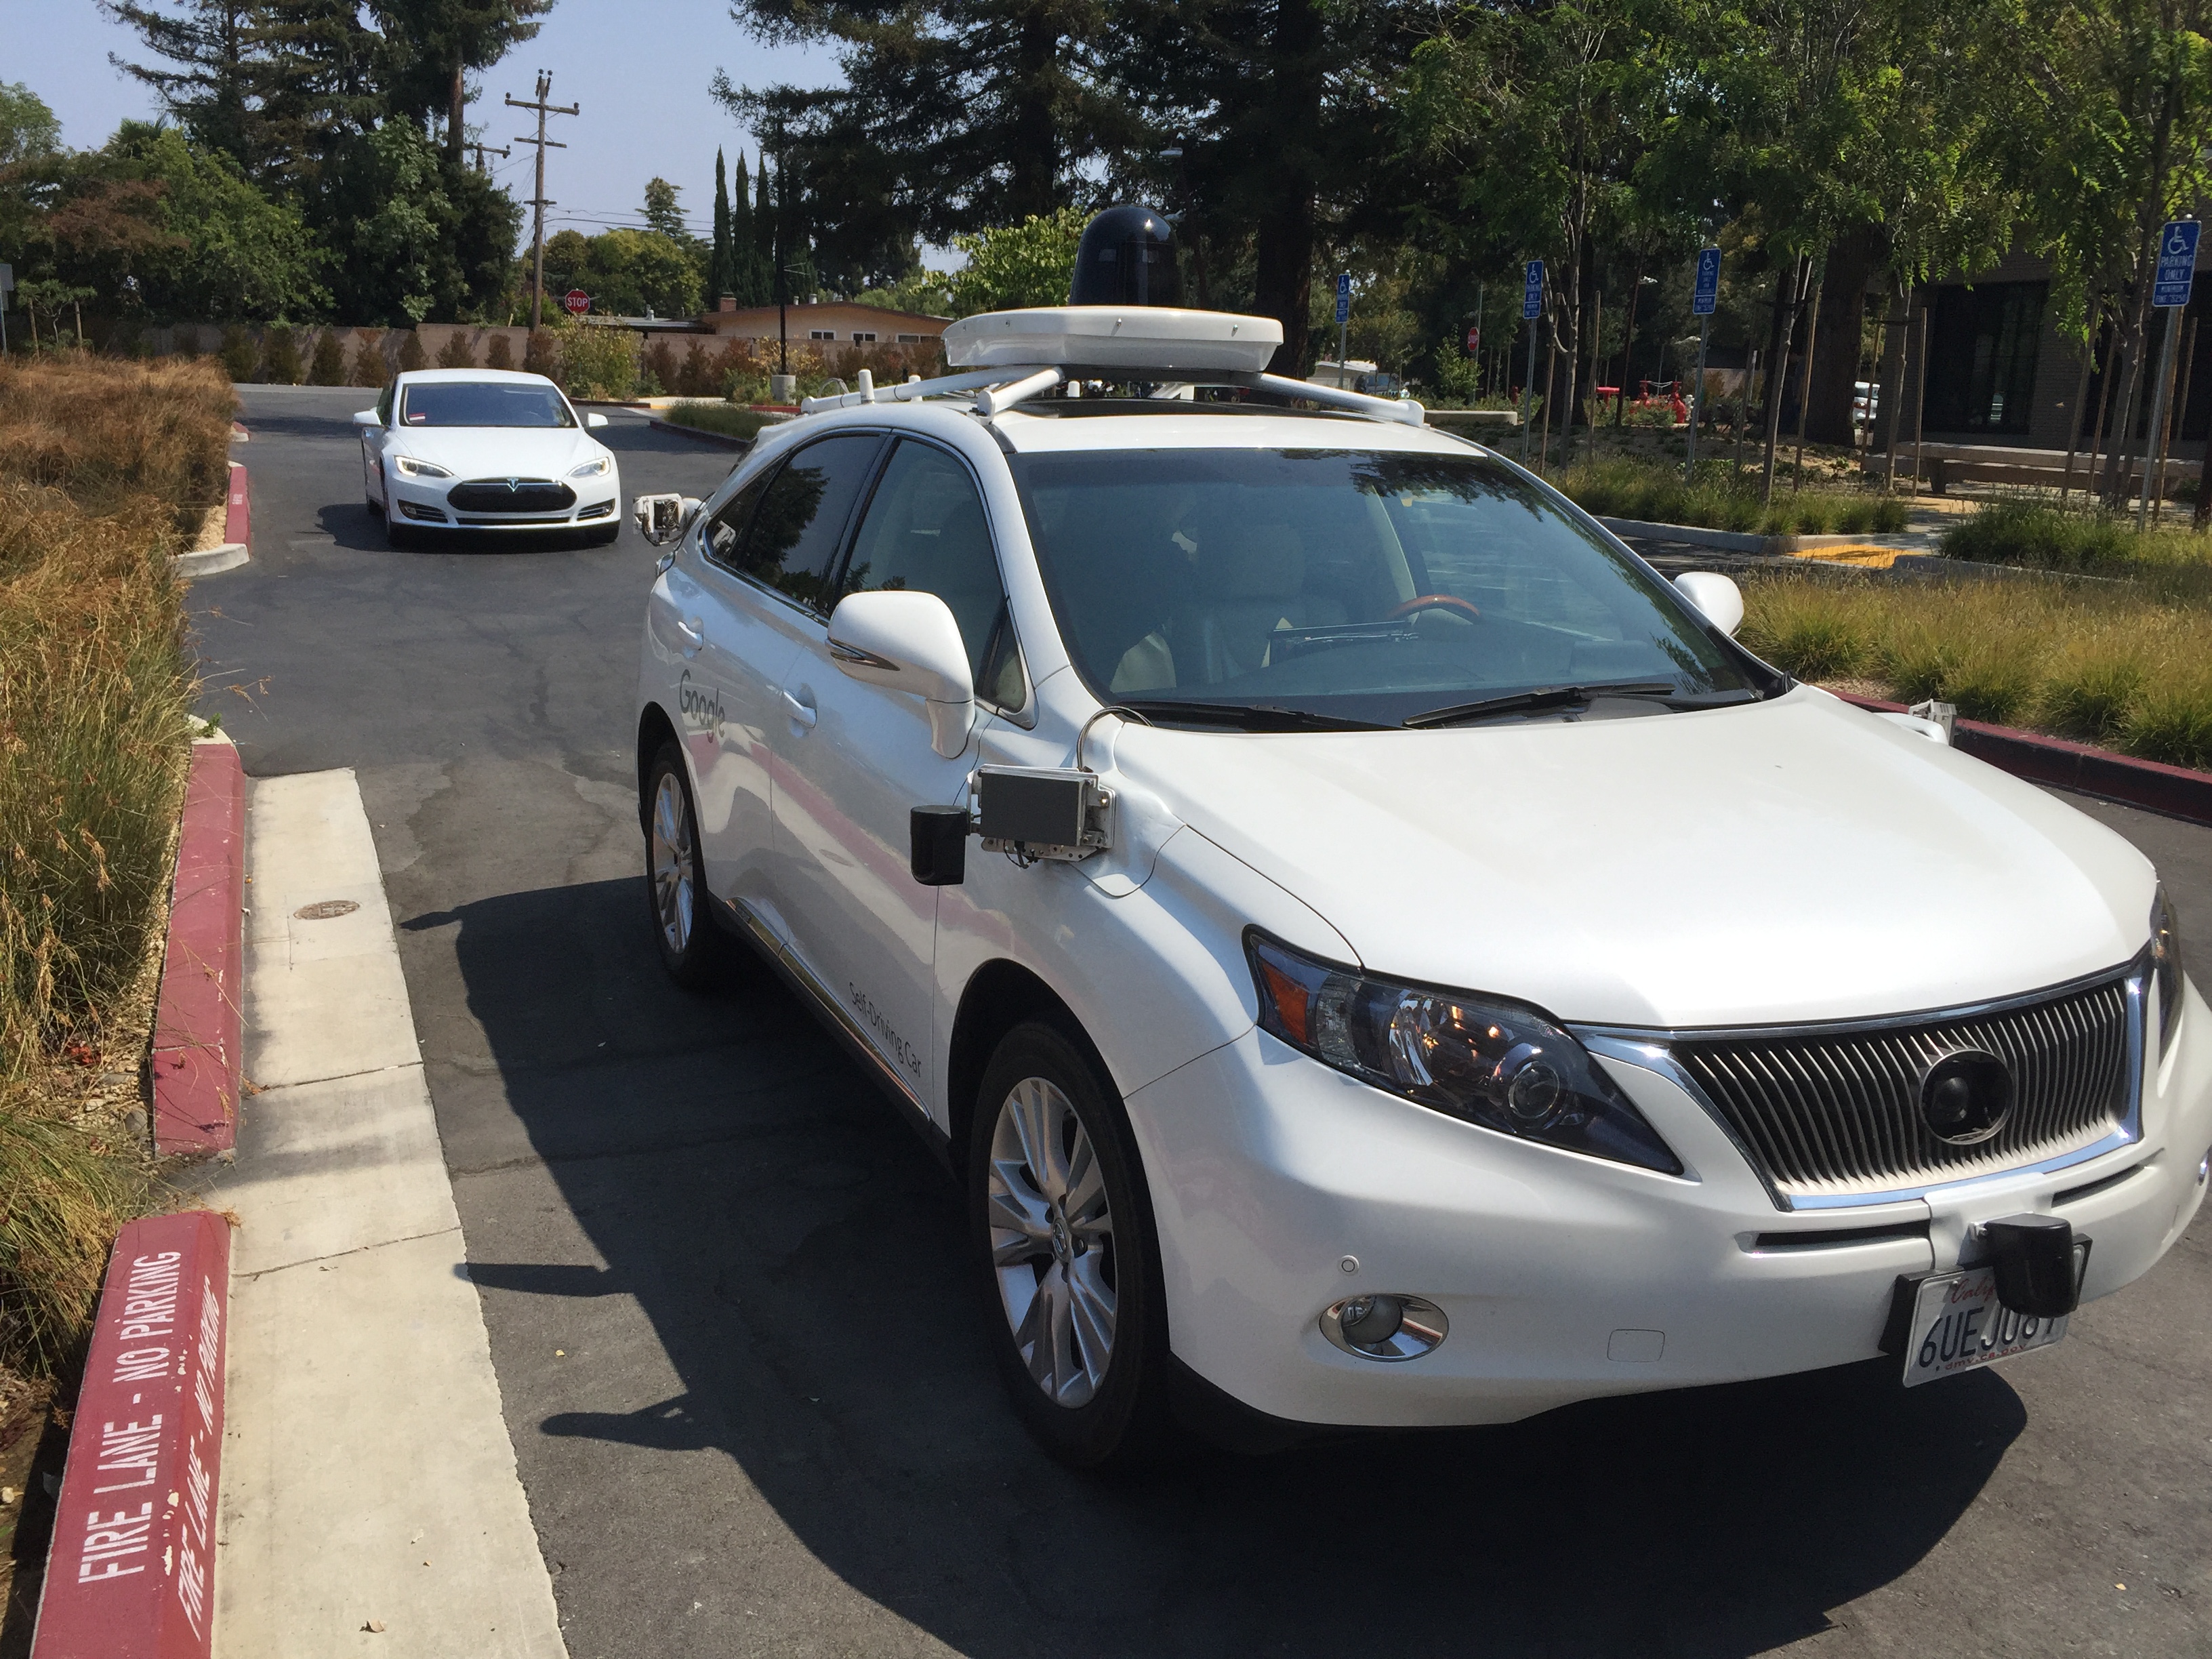 Google has more than fifty experimental self-driving cars on the road. About half are like this one – a modified Lexus RH450H – while the rest are small prototype test vehicles that don’t have steering wheels.